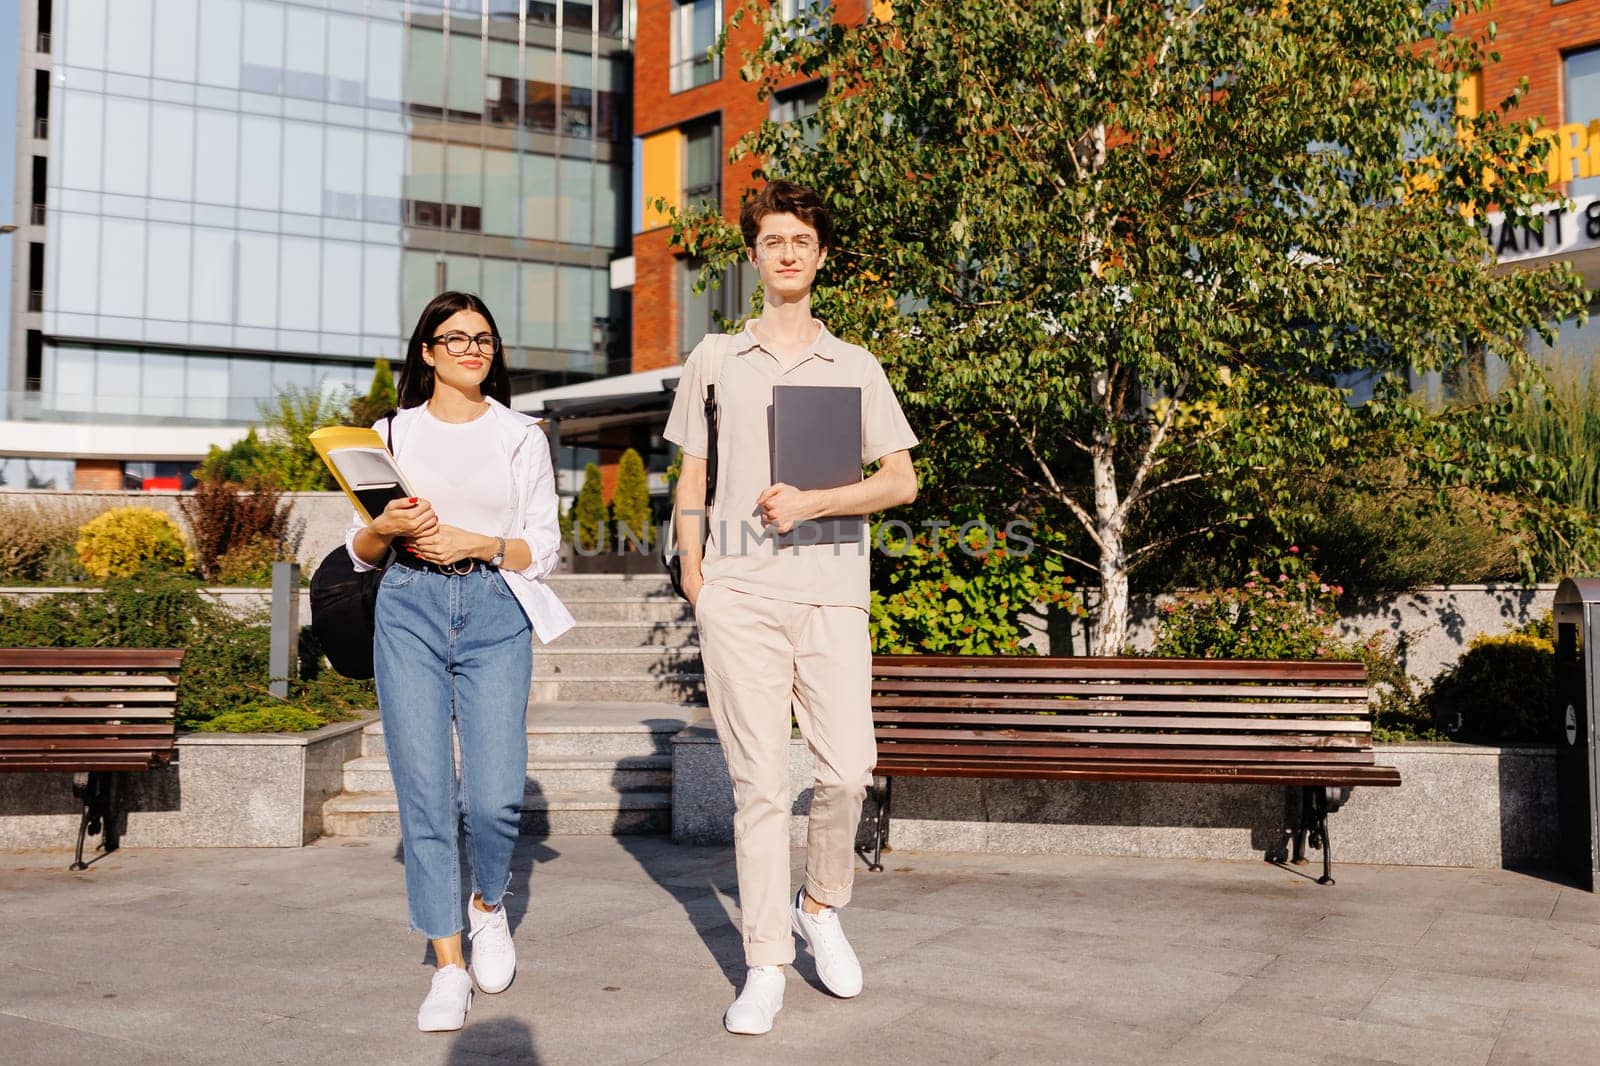 Smiling young male with laptop and female with books looking at camera while standing together on campus street near green trees against blurred college building in daylight